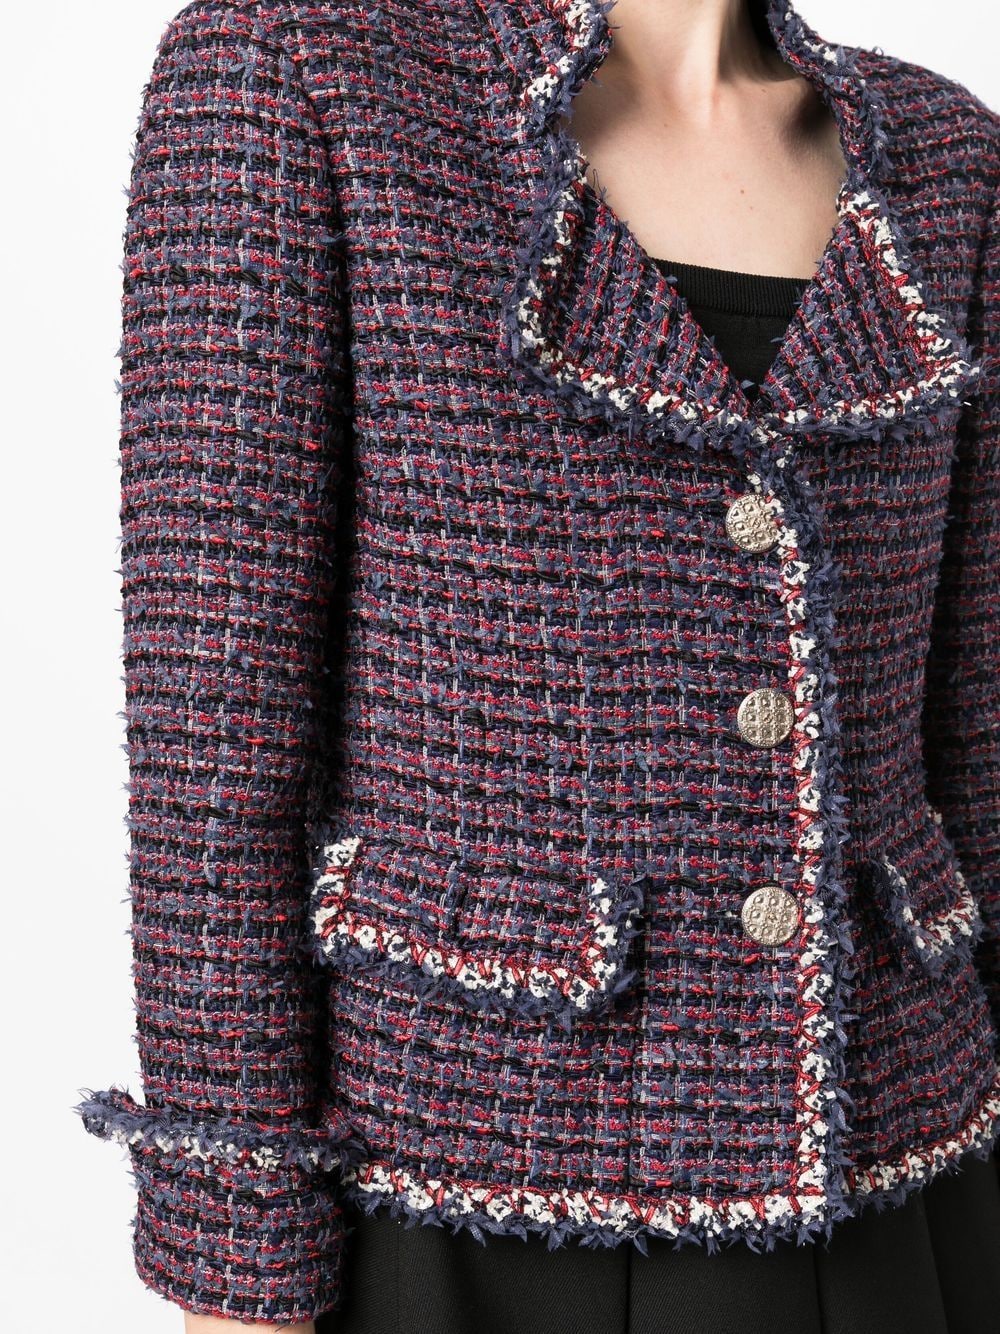 The secret of the Chanel tweed jacket